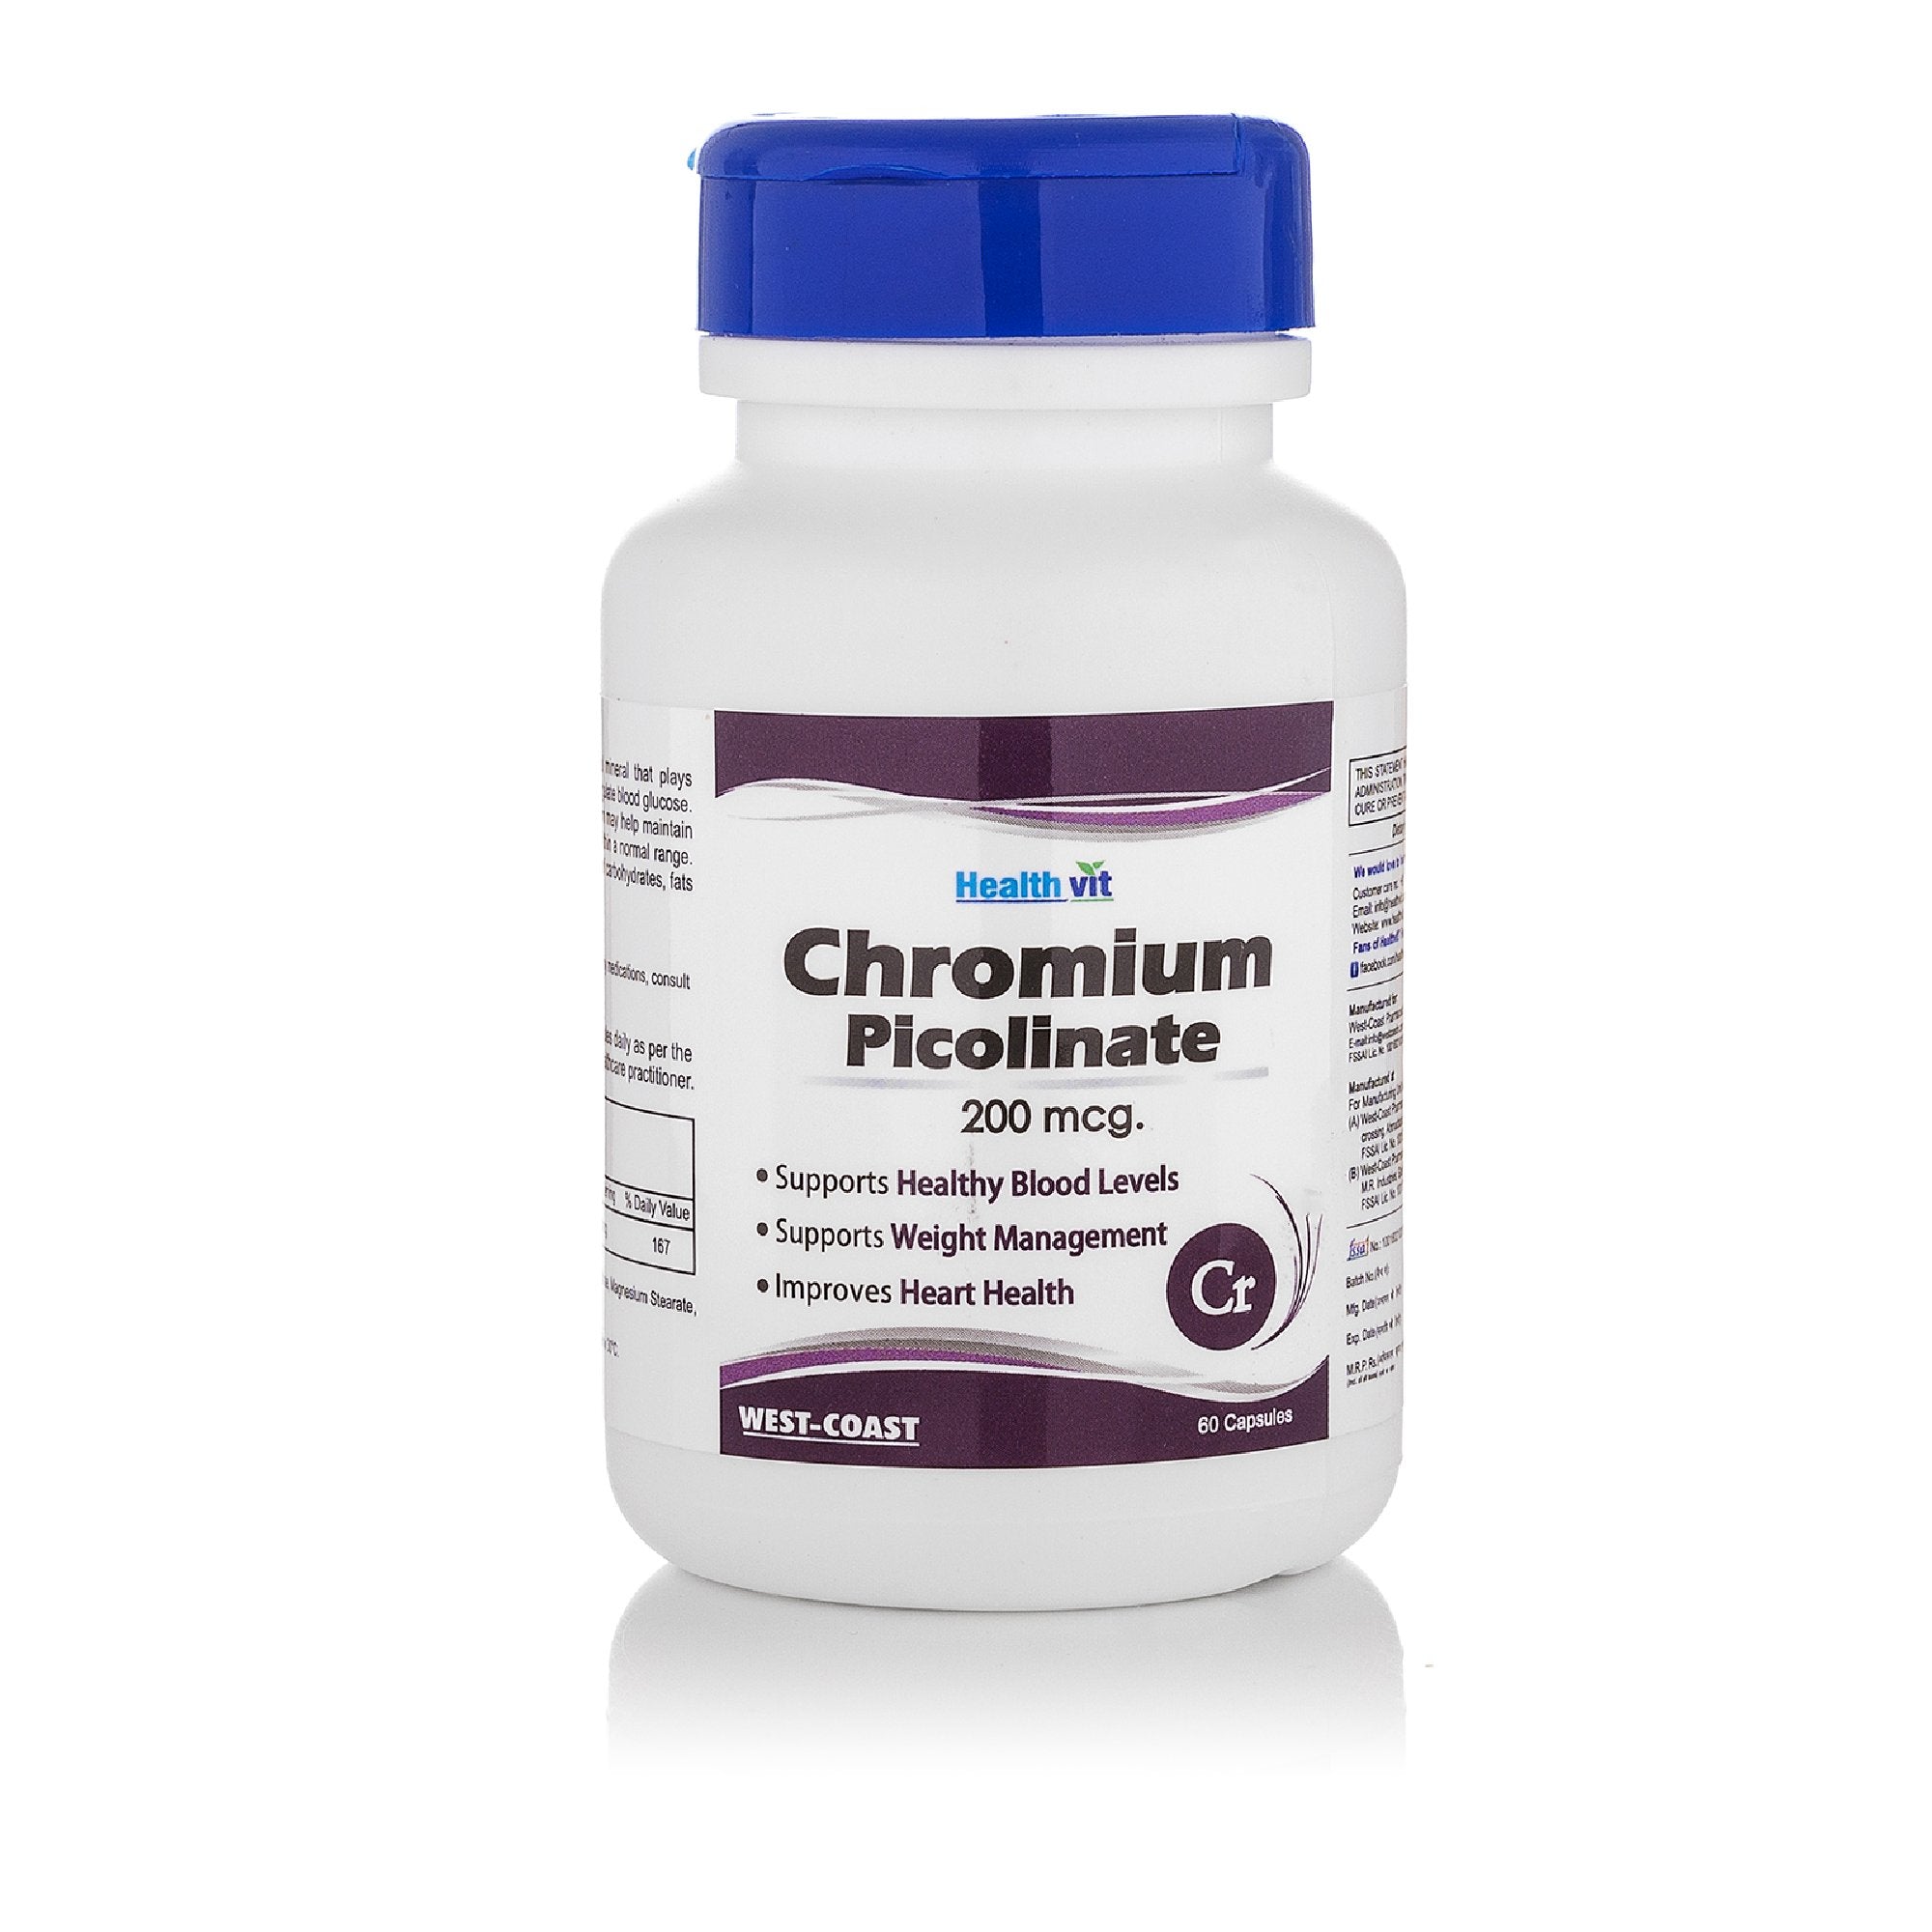 Healthvit Chromium Picolinate 200mcg | Supports Healthy Metabolism | Supports Healthy Blood Sugar Level | Supports Healthy Heart | Essential For Weight Management | Vegan And Non-GMO | 60 Capsules